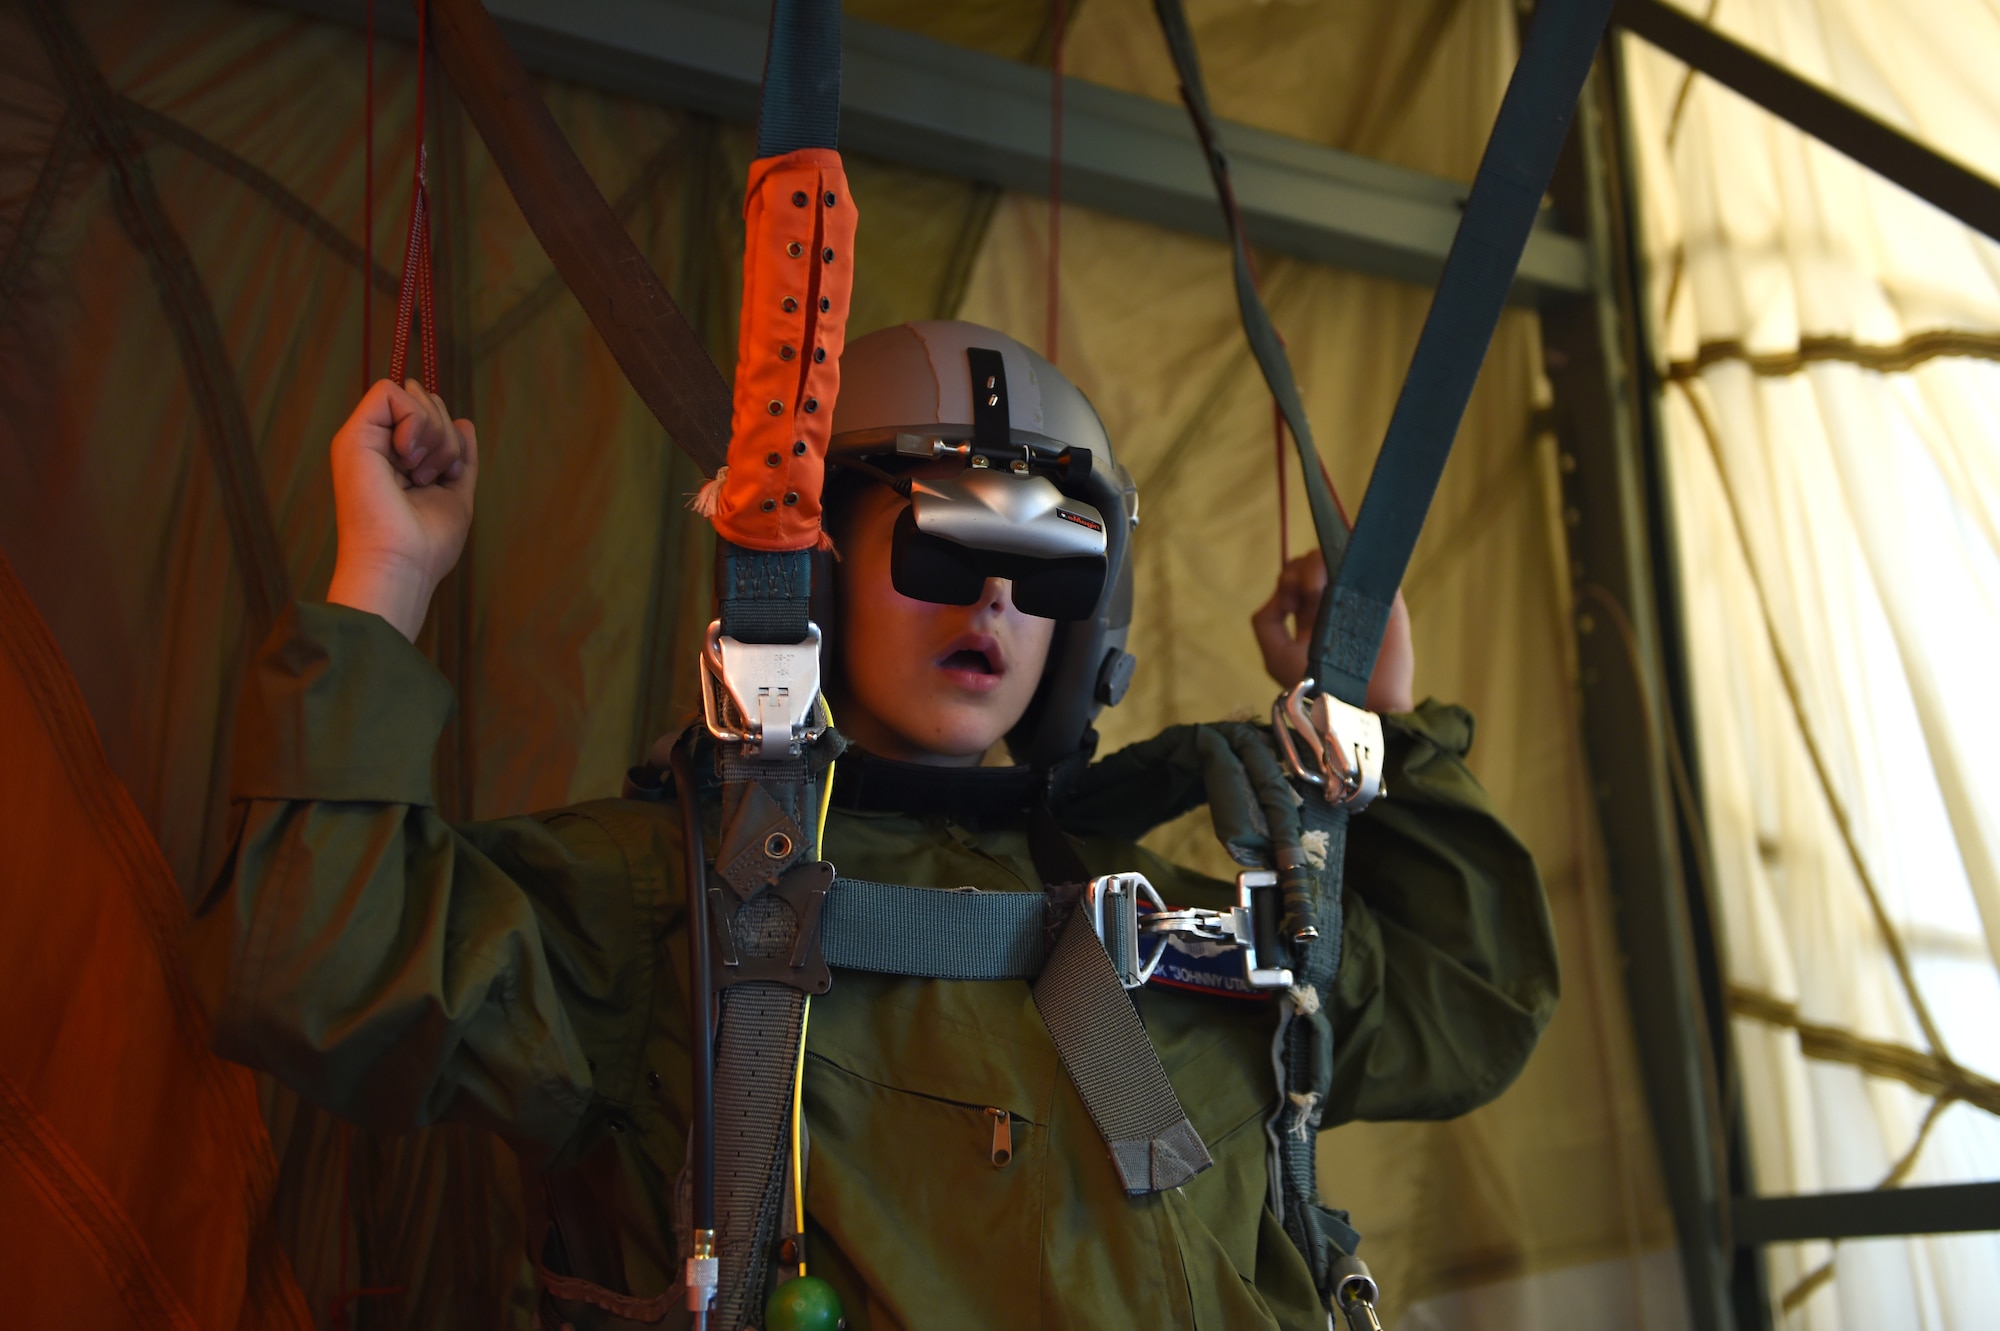 Nicholas Duffy, one of McChord’s newest Pilots for a Day, simulates parachute jumping, at Joint Base Lewis-McChord, Wash., May 26, 2016. Nicholas and his brother Daniel visited the fire station, military working dogs, air traffic control tower, 22nd Special Tactics Squadron, a C-17 Globemaster III, a C-17 flight simulator and concluded with a pizza and cake party. (U.S. Air Force photo/Staff Sgt. Naomi Shipley)